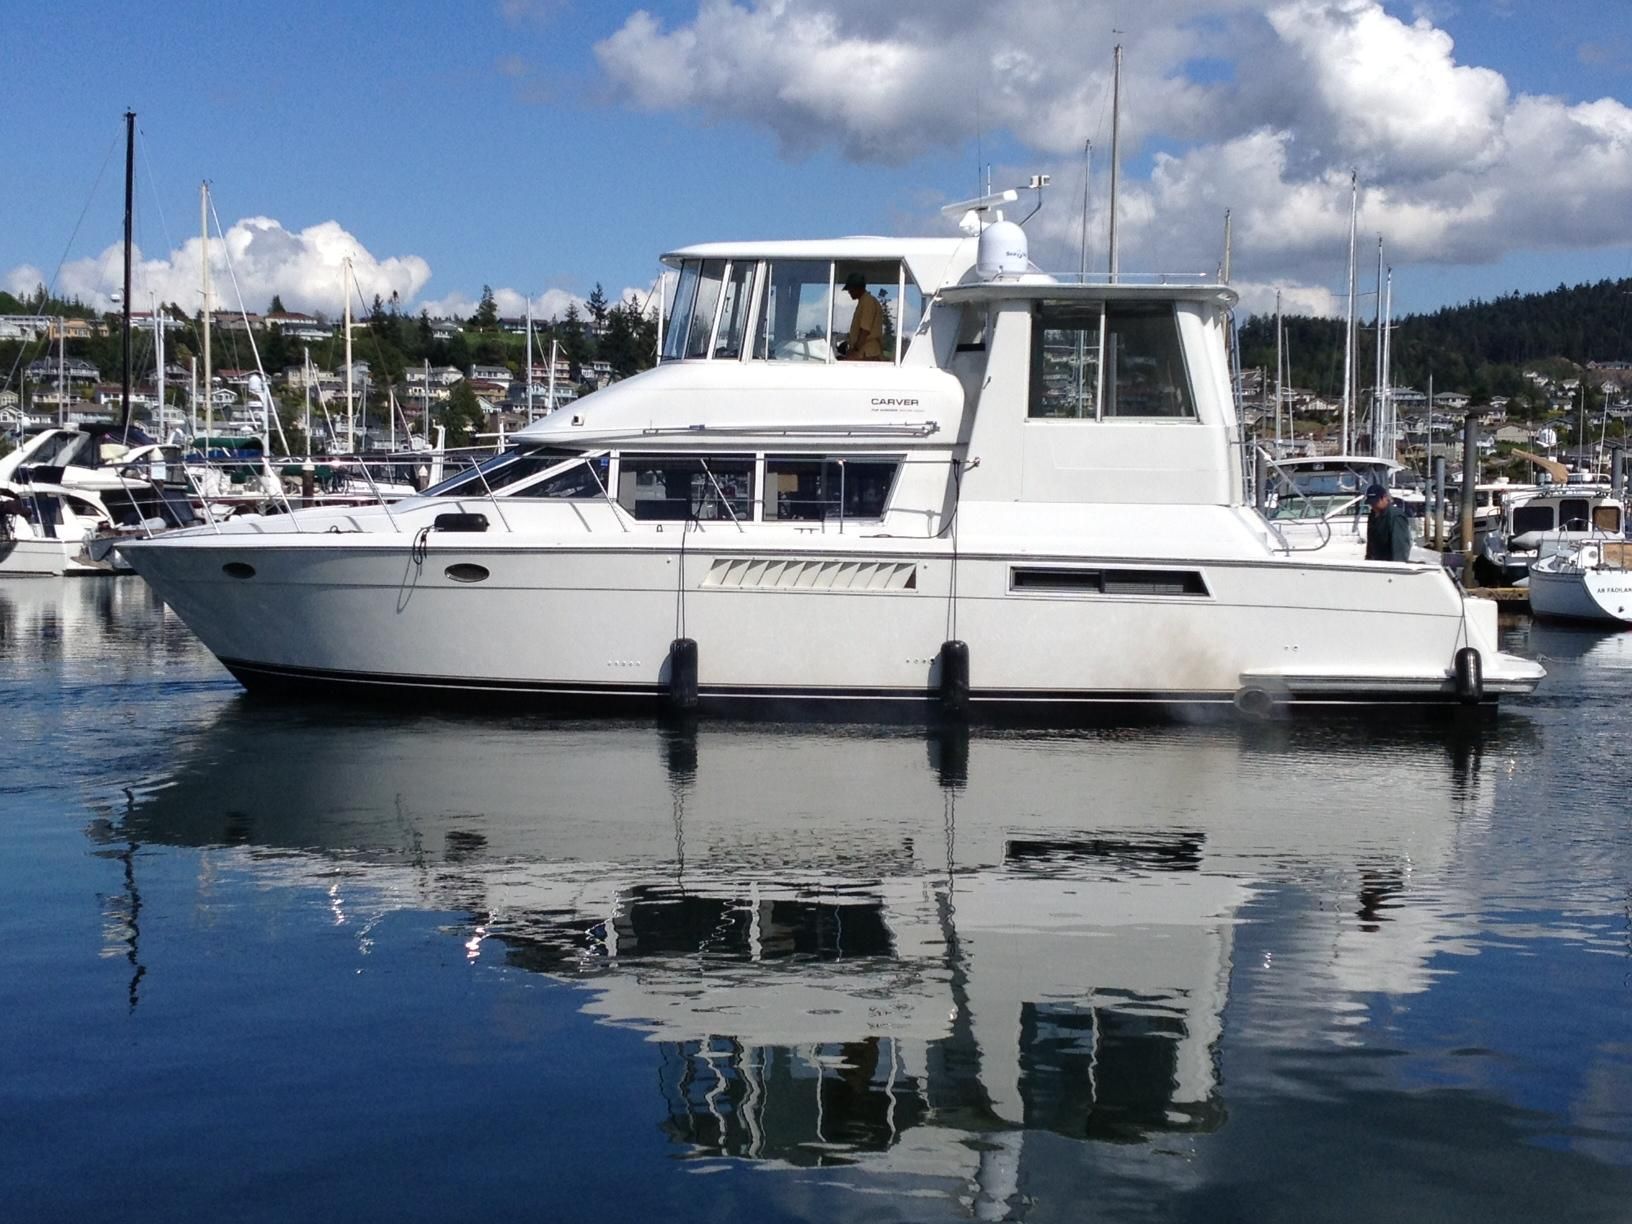 1998 Carver 50 Motor Yacht Power Boat For Sale - www.yachtworld.com